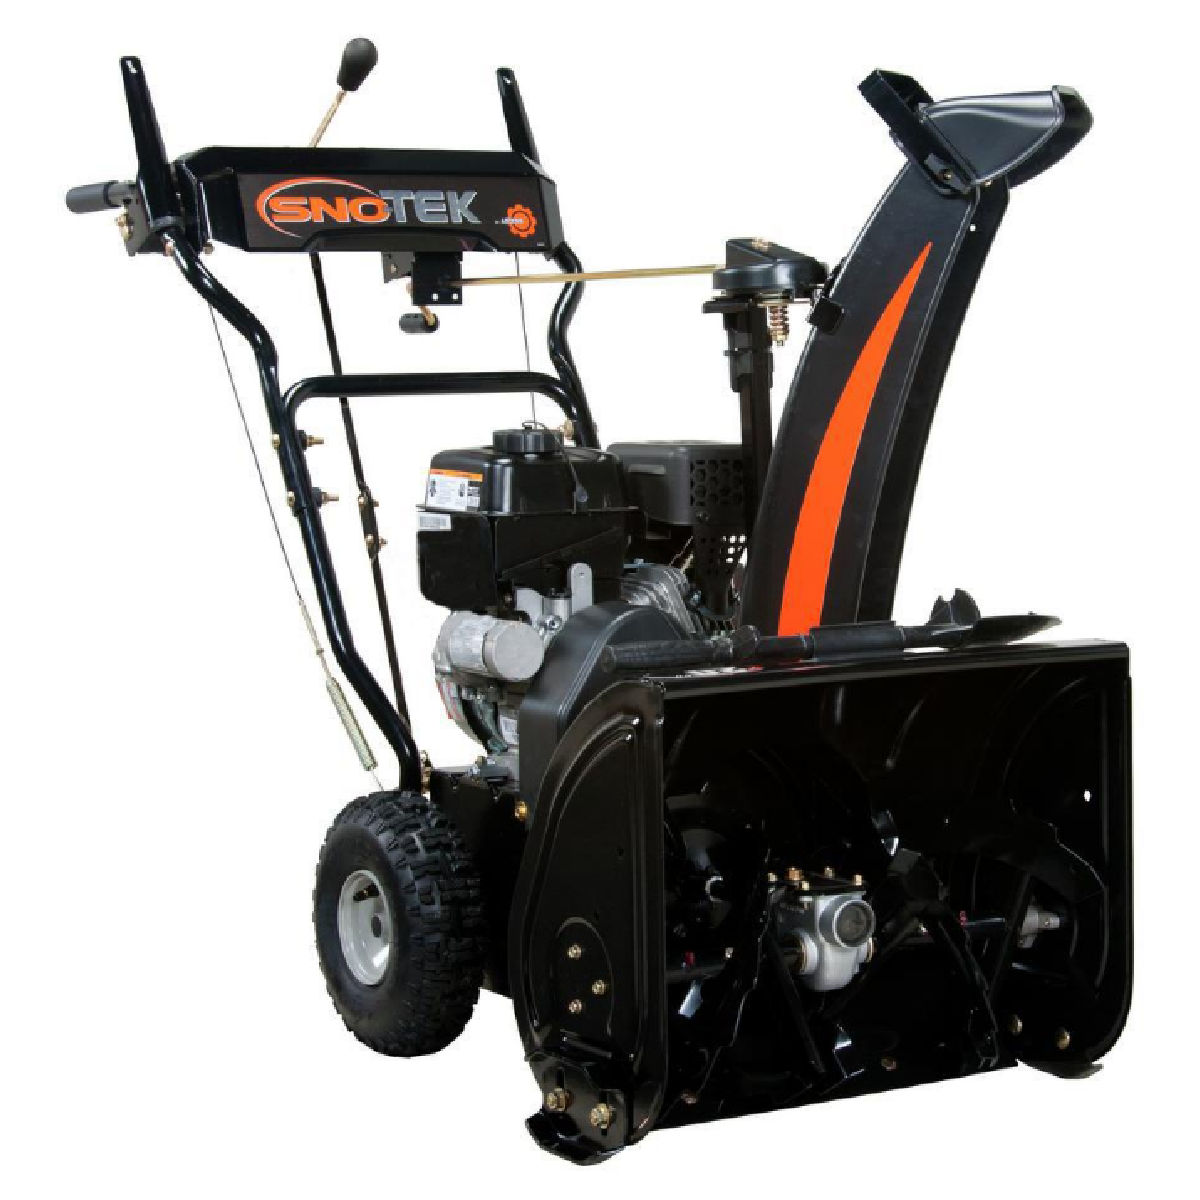 Sno-Tek 920406 20-Inch 2-Stage Self-Propelled Gas Snow Blower